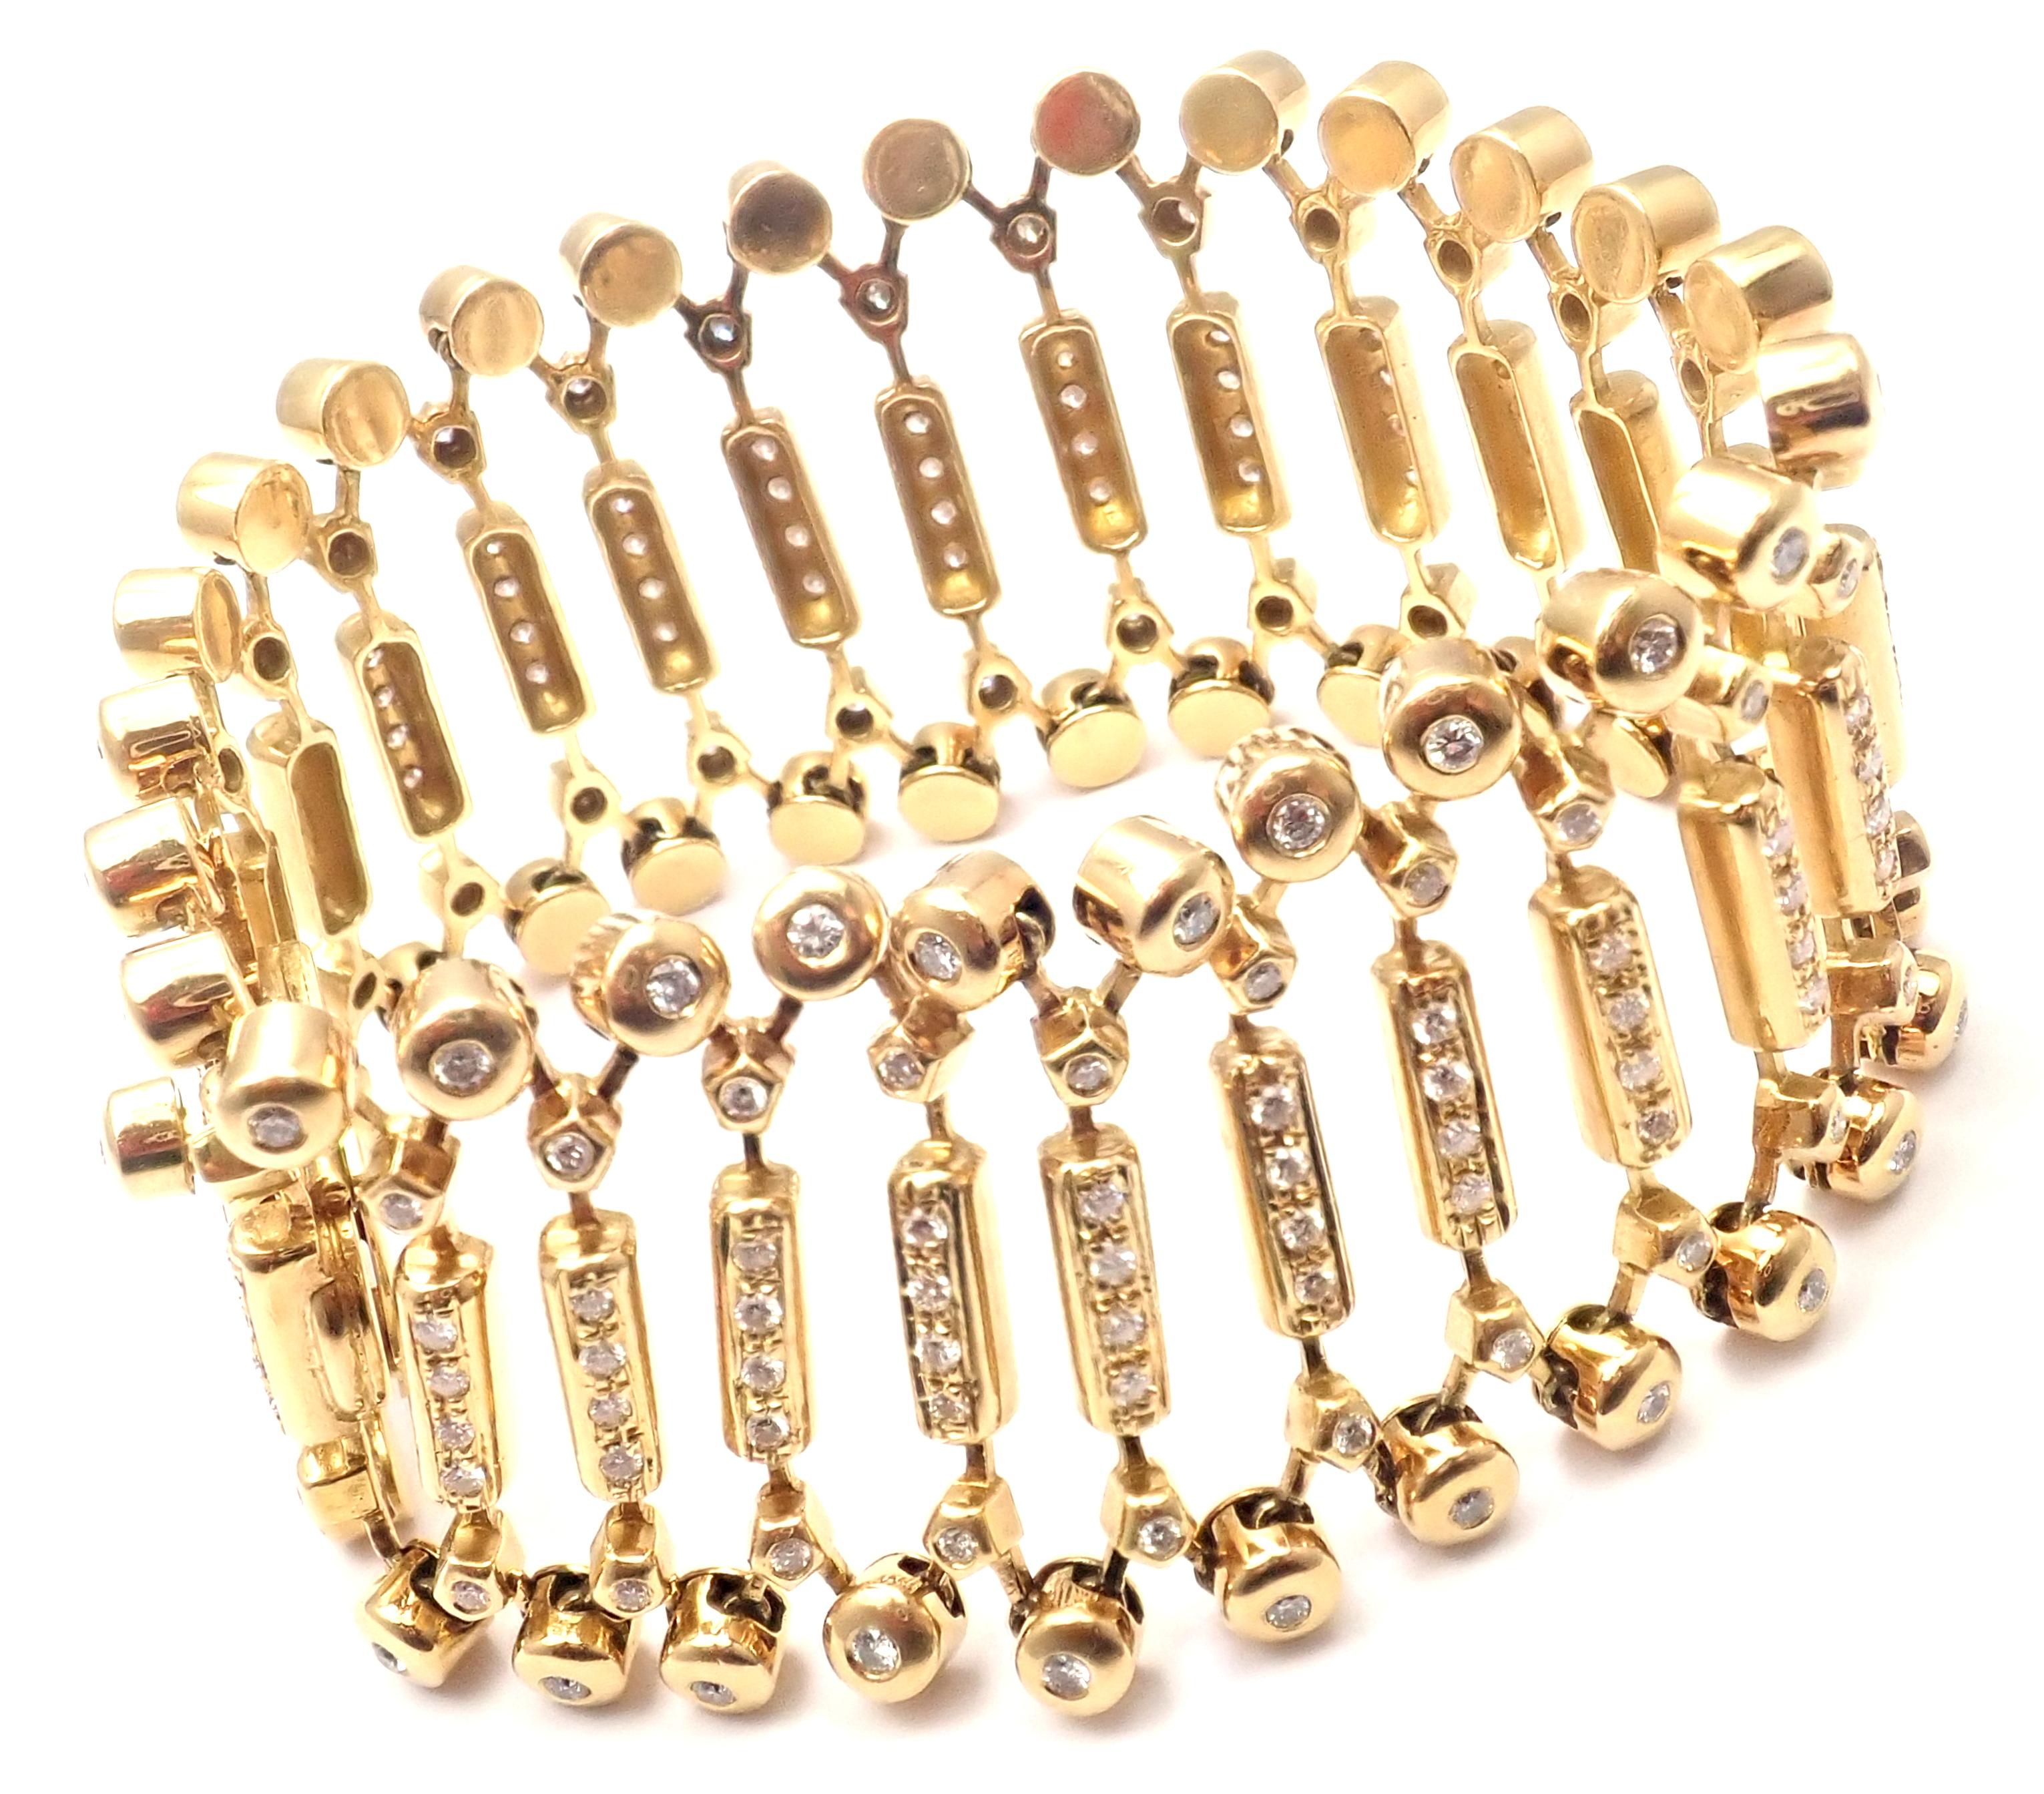 18k Yellow Gold Diamond Wide Link Bracelet by Illias Lalaounis Greece. 
With 215 round brilliant cut diamonds VS1 clarity, G color total weight approximately 3ct
Details: 
Weight: 76.3 grams
Length: 7